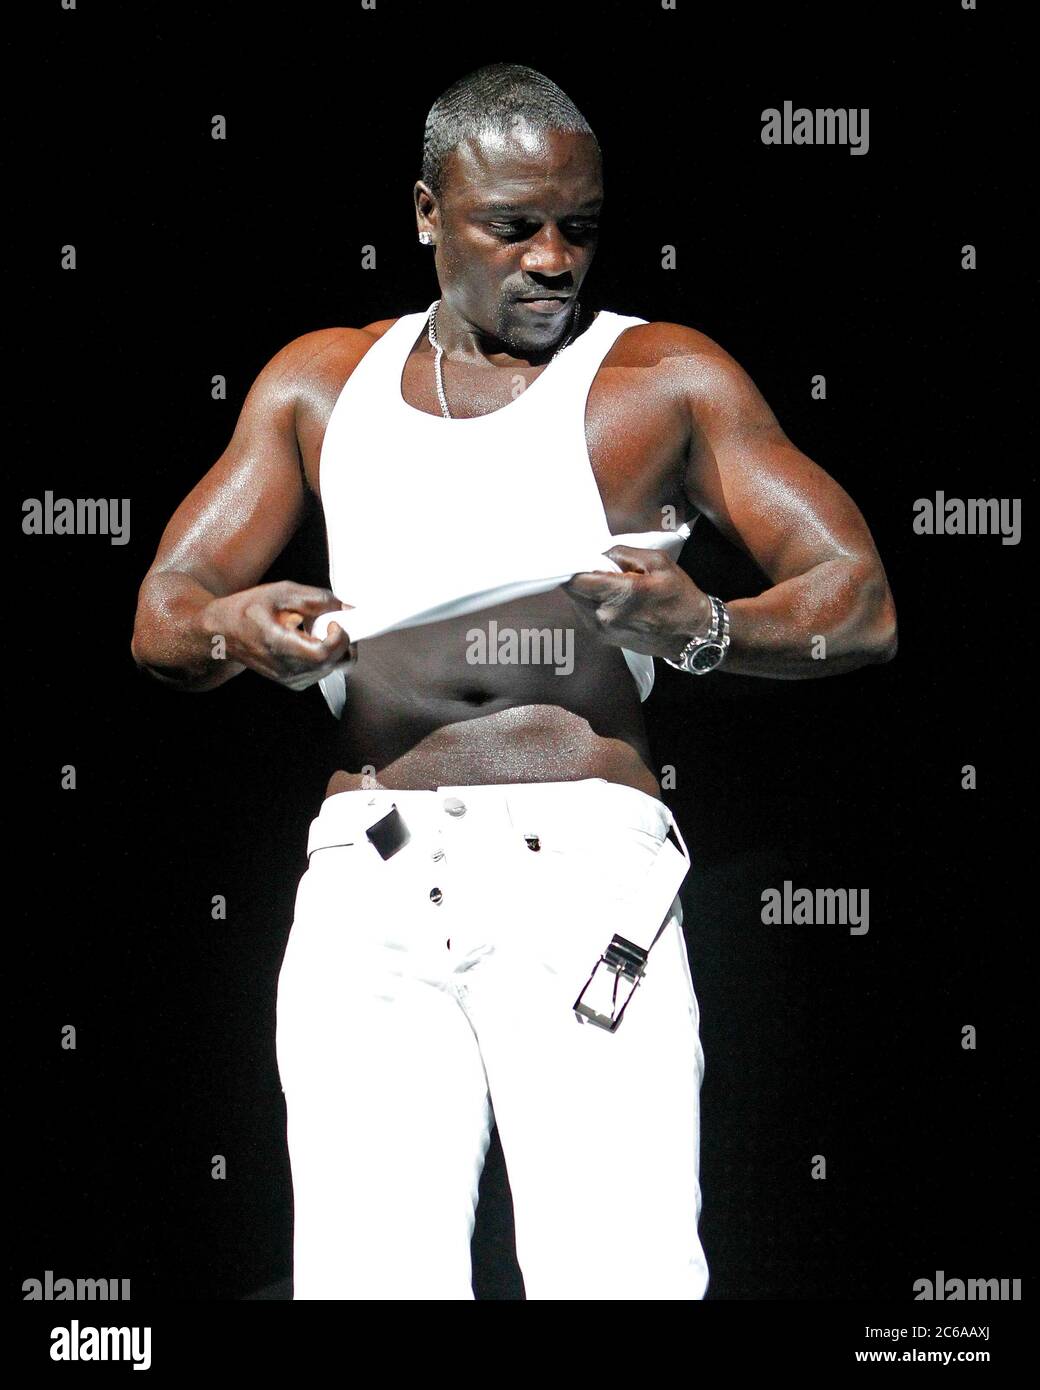 R & B male vocalist Akon strips down to his briefs while performing on stage at the BankAtlantic Center in Sunrise, Florida. Stock Photo